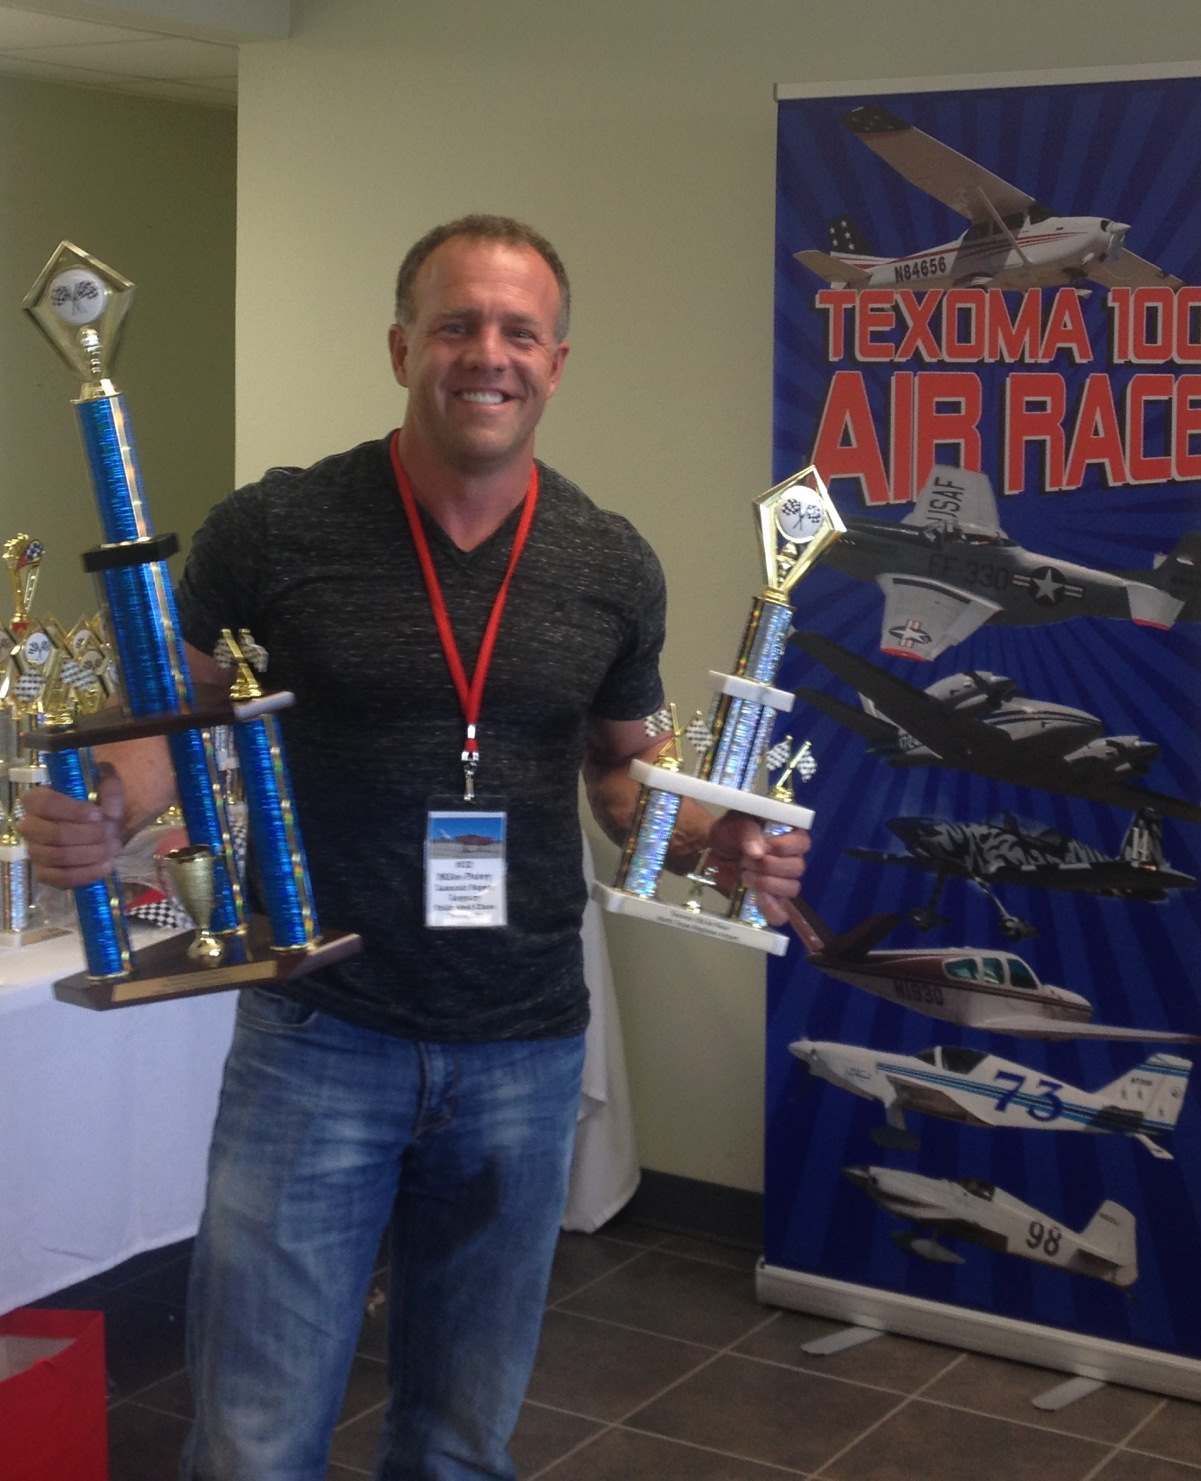 Mike Patey with aviation awards